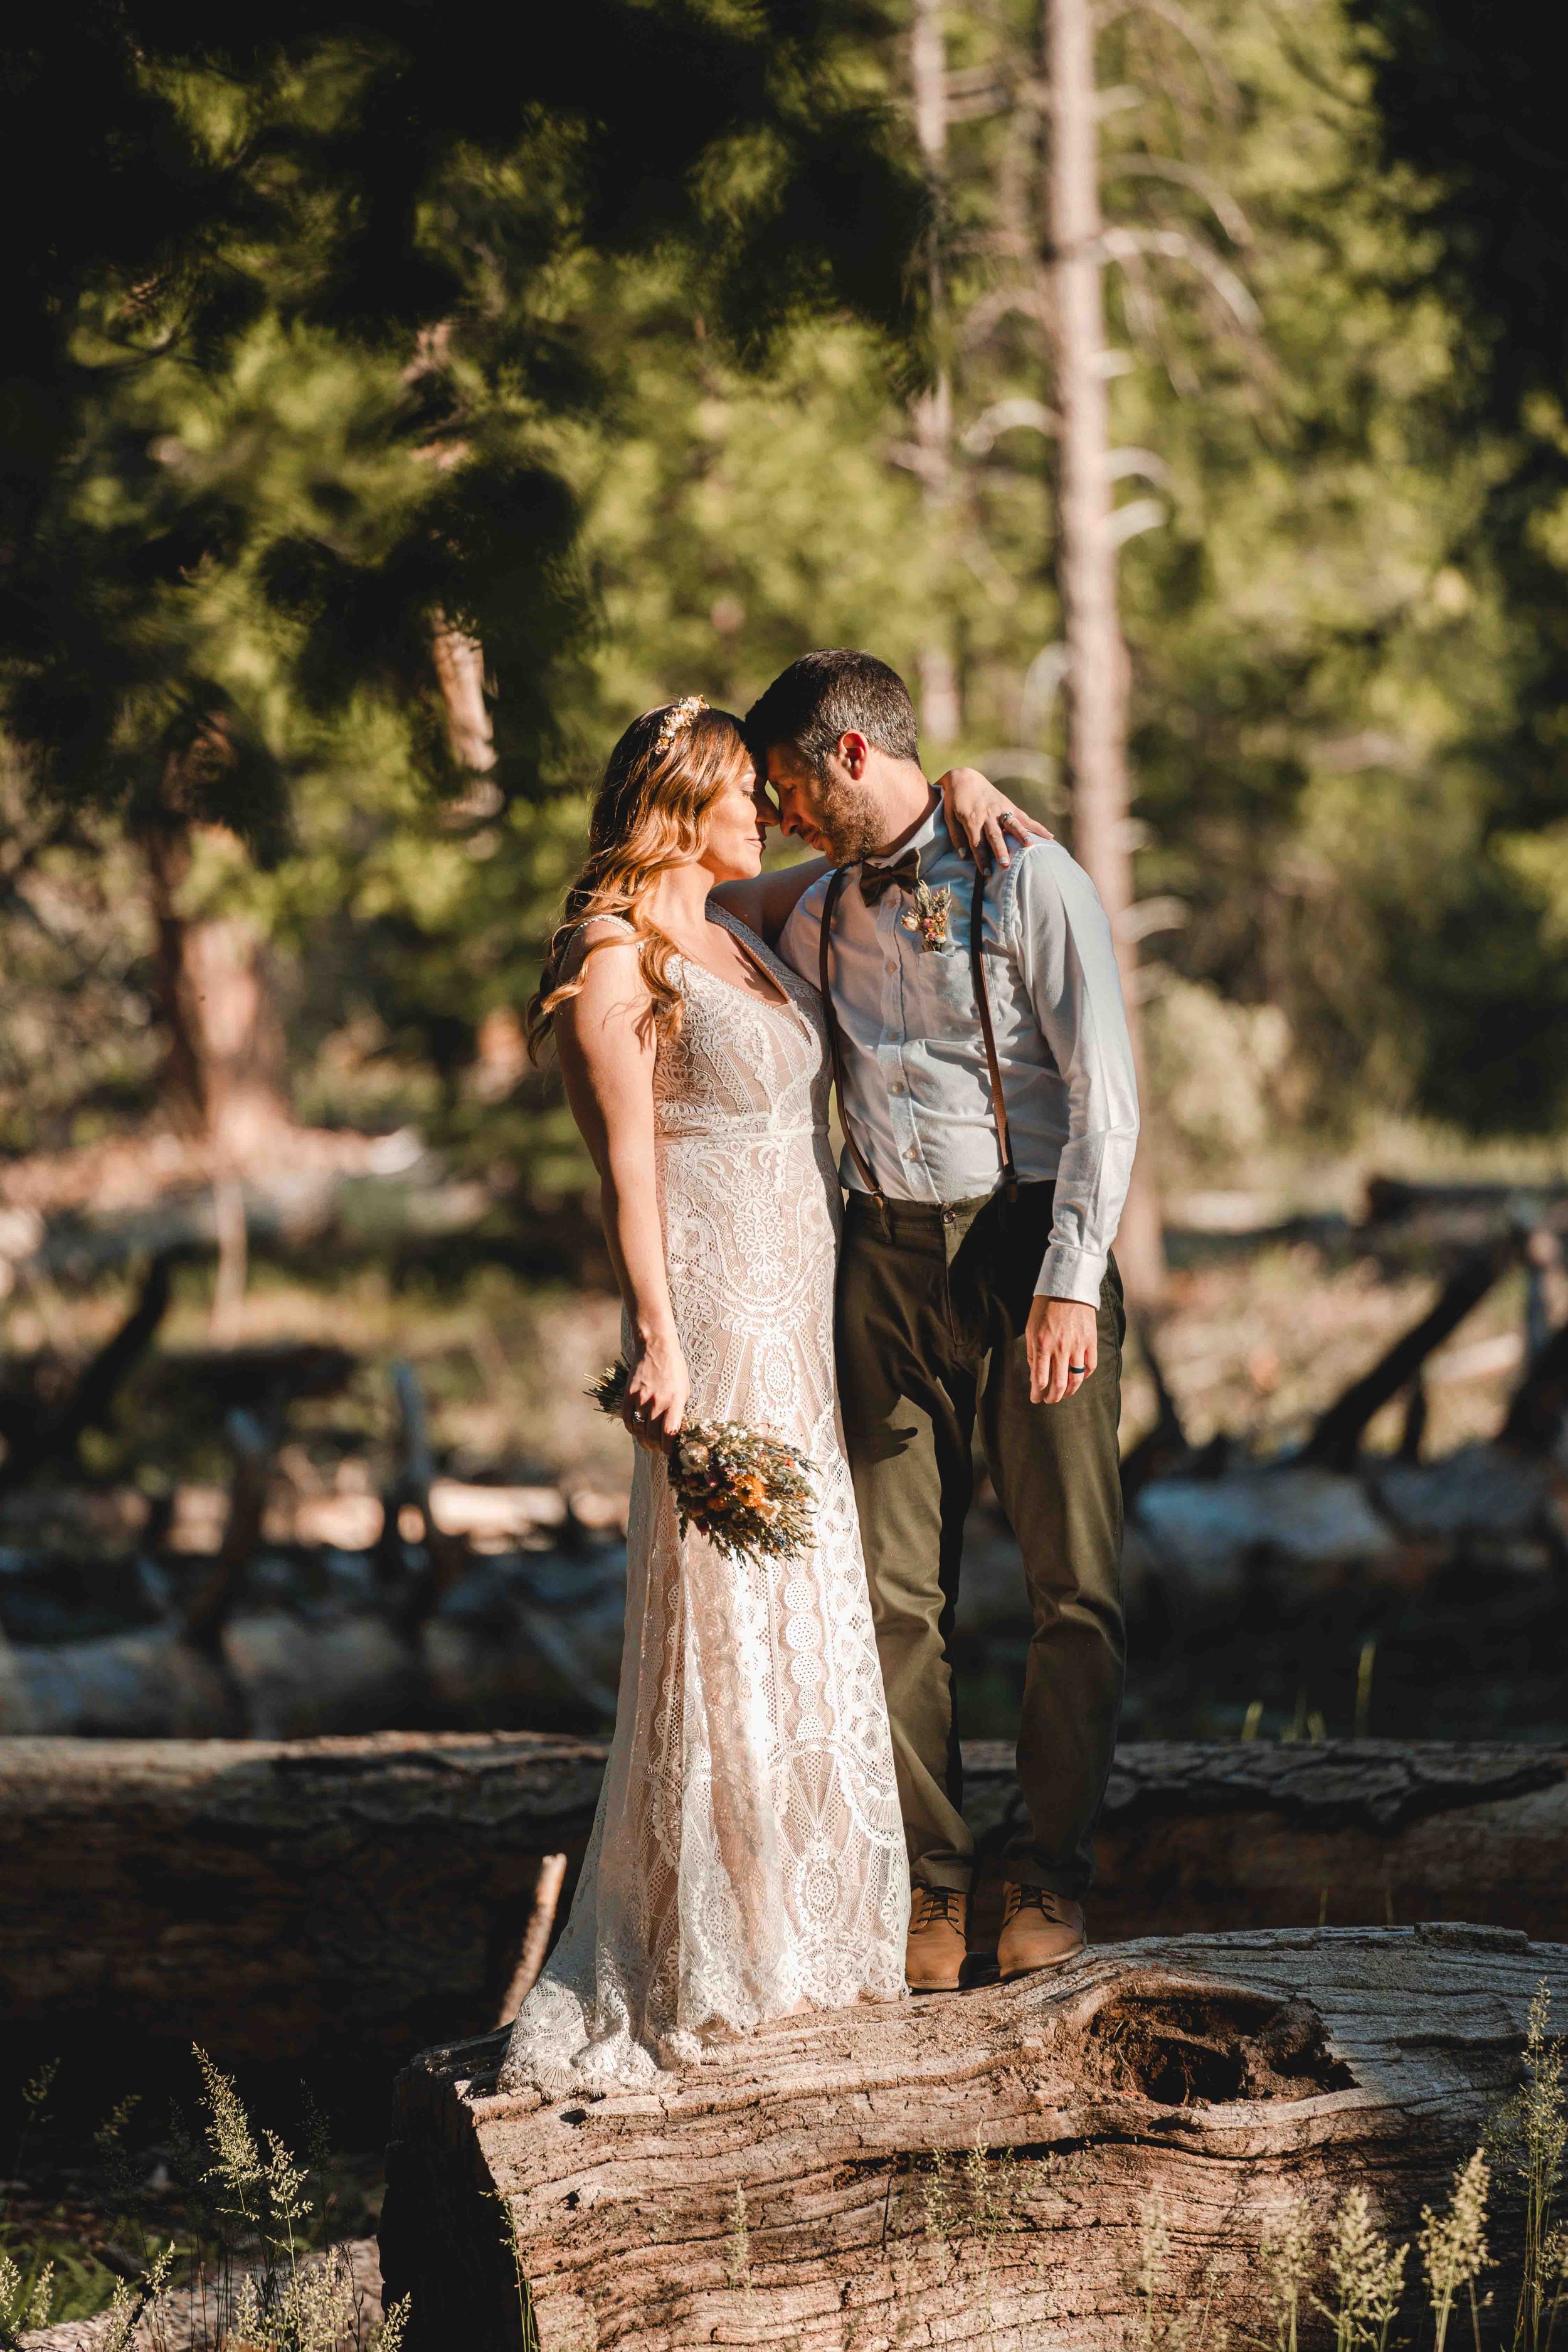 Bride and groom standing on a log under a tree at sunset